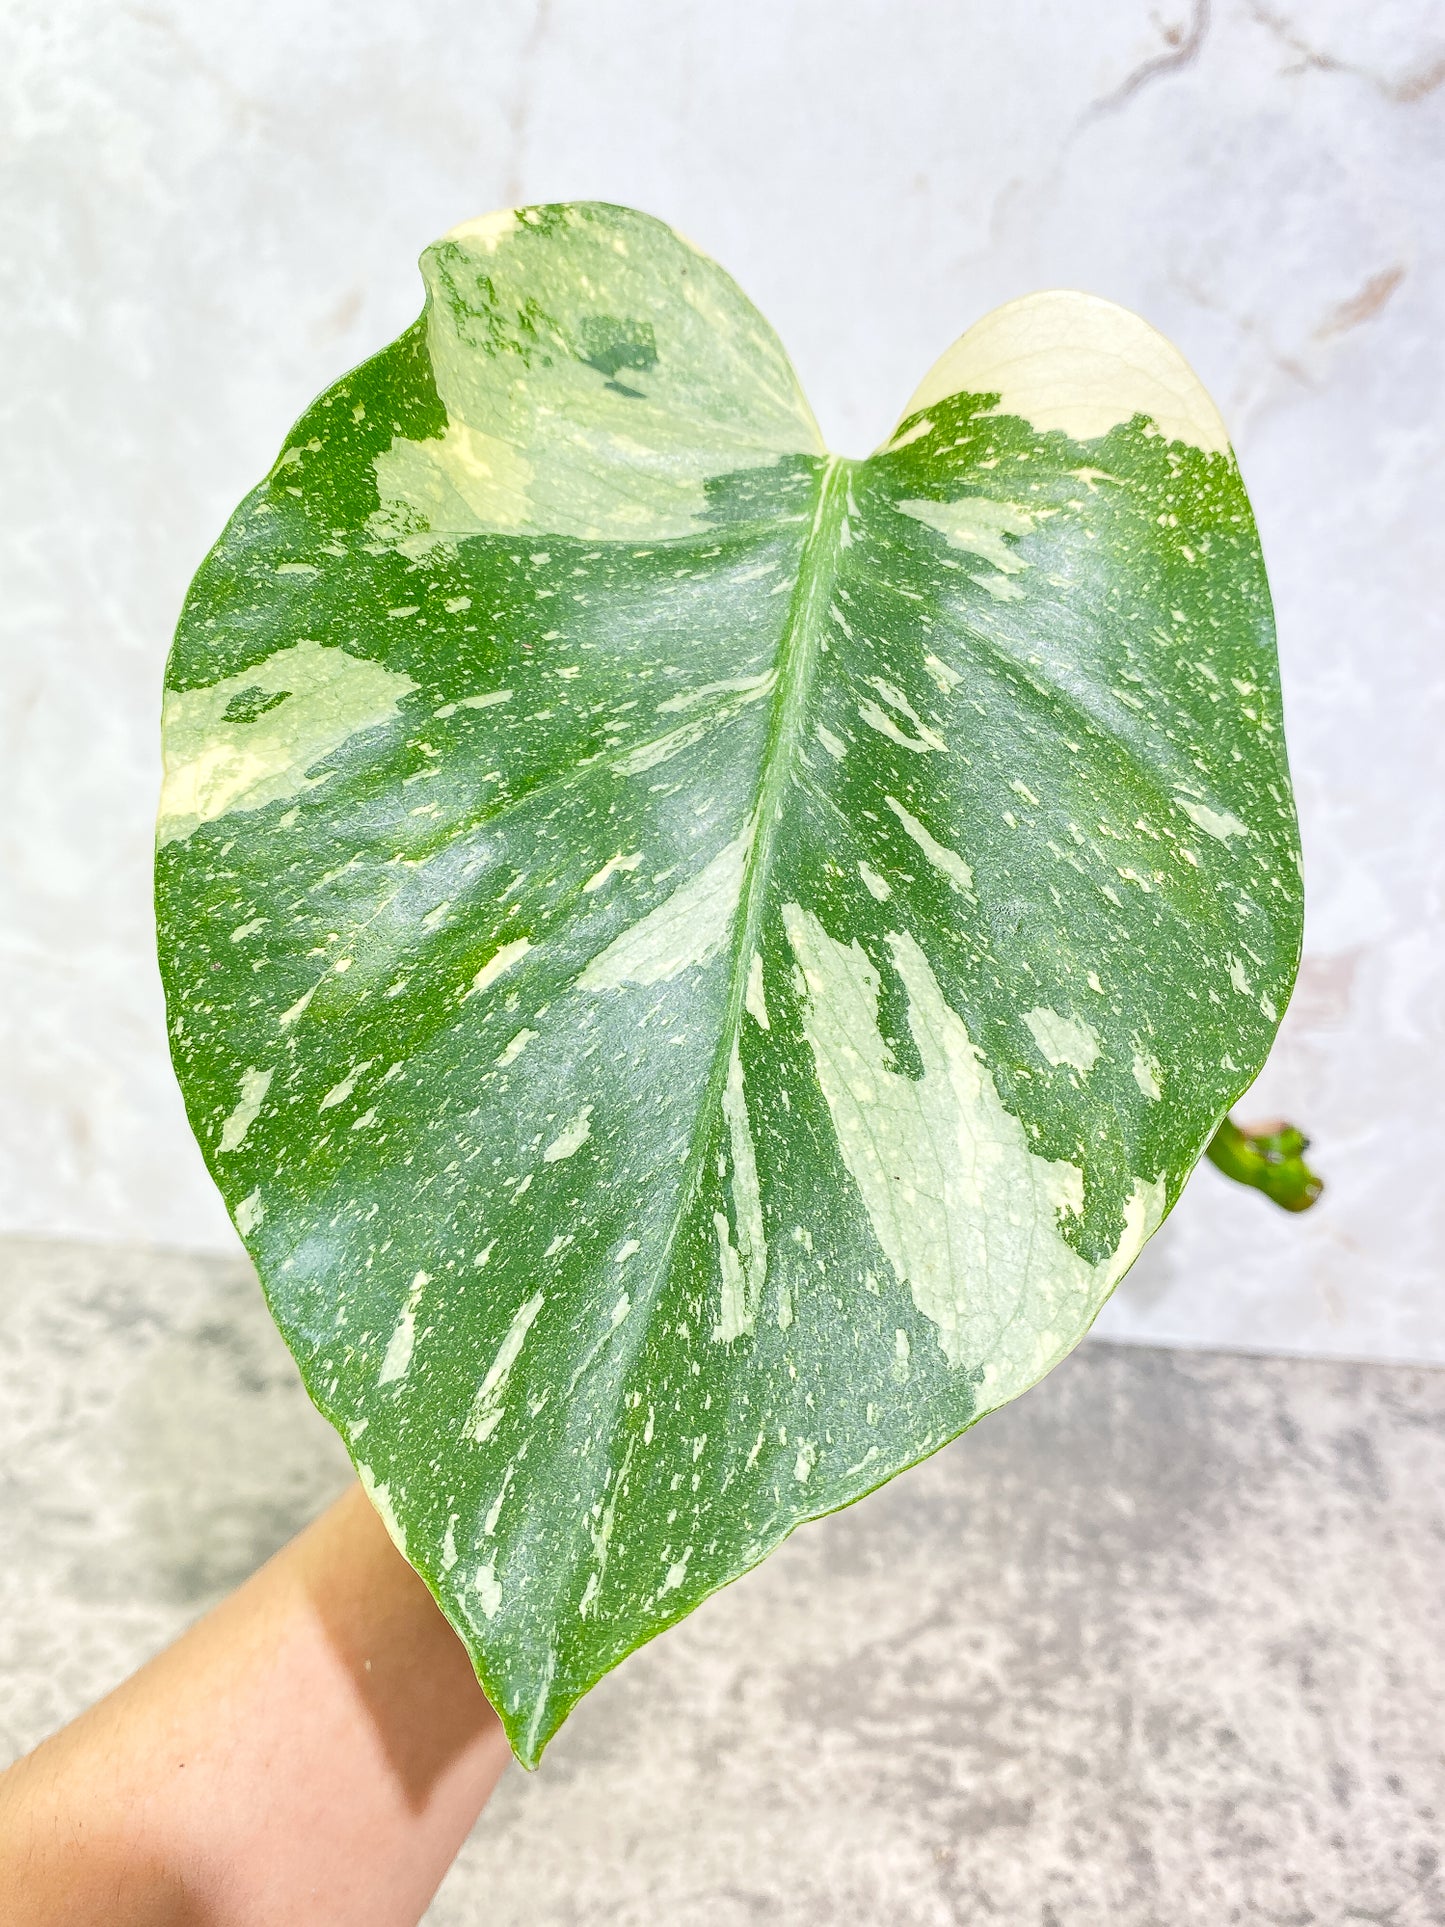 Monstera Thai Constellation 1 leaf unrooted cutting